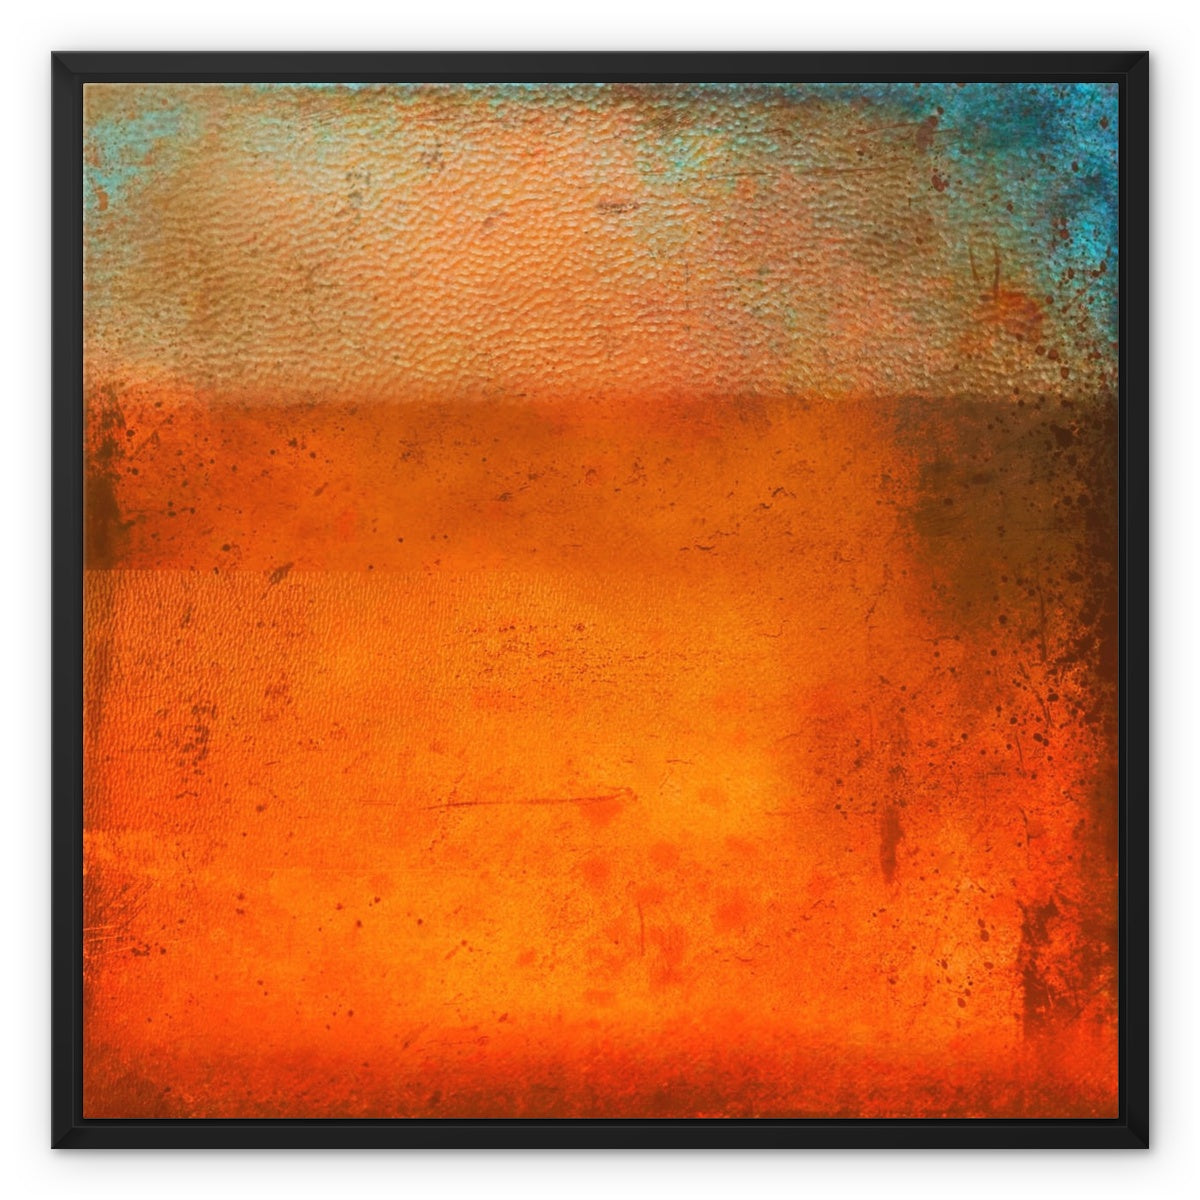 Sunset Horizon Abstract Painting | Framed Canvas From Scotland-Floating Framed Canvas Prints-Abstract & Impressionistic Art Gallery-24"x24"-Black Frame-Paintings, Prints, Homeware, Art Gifts From Scotland By Scottish Artist Kevin Hunter